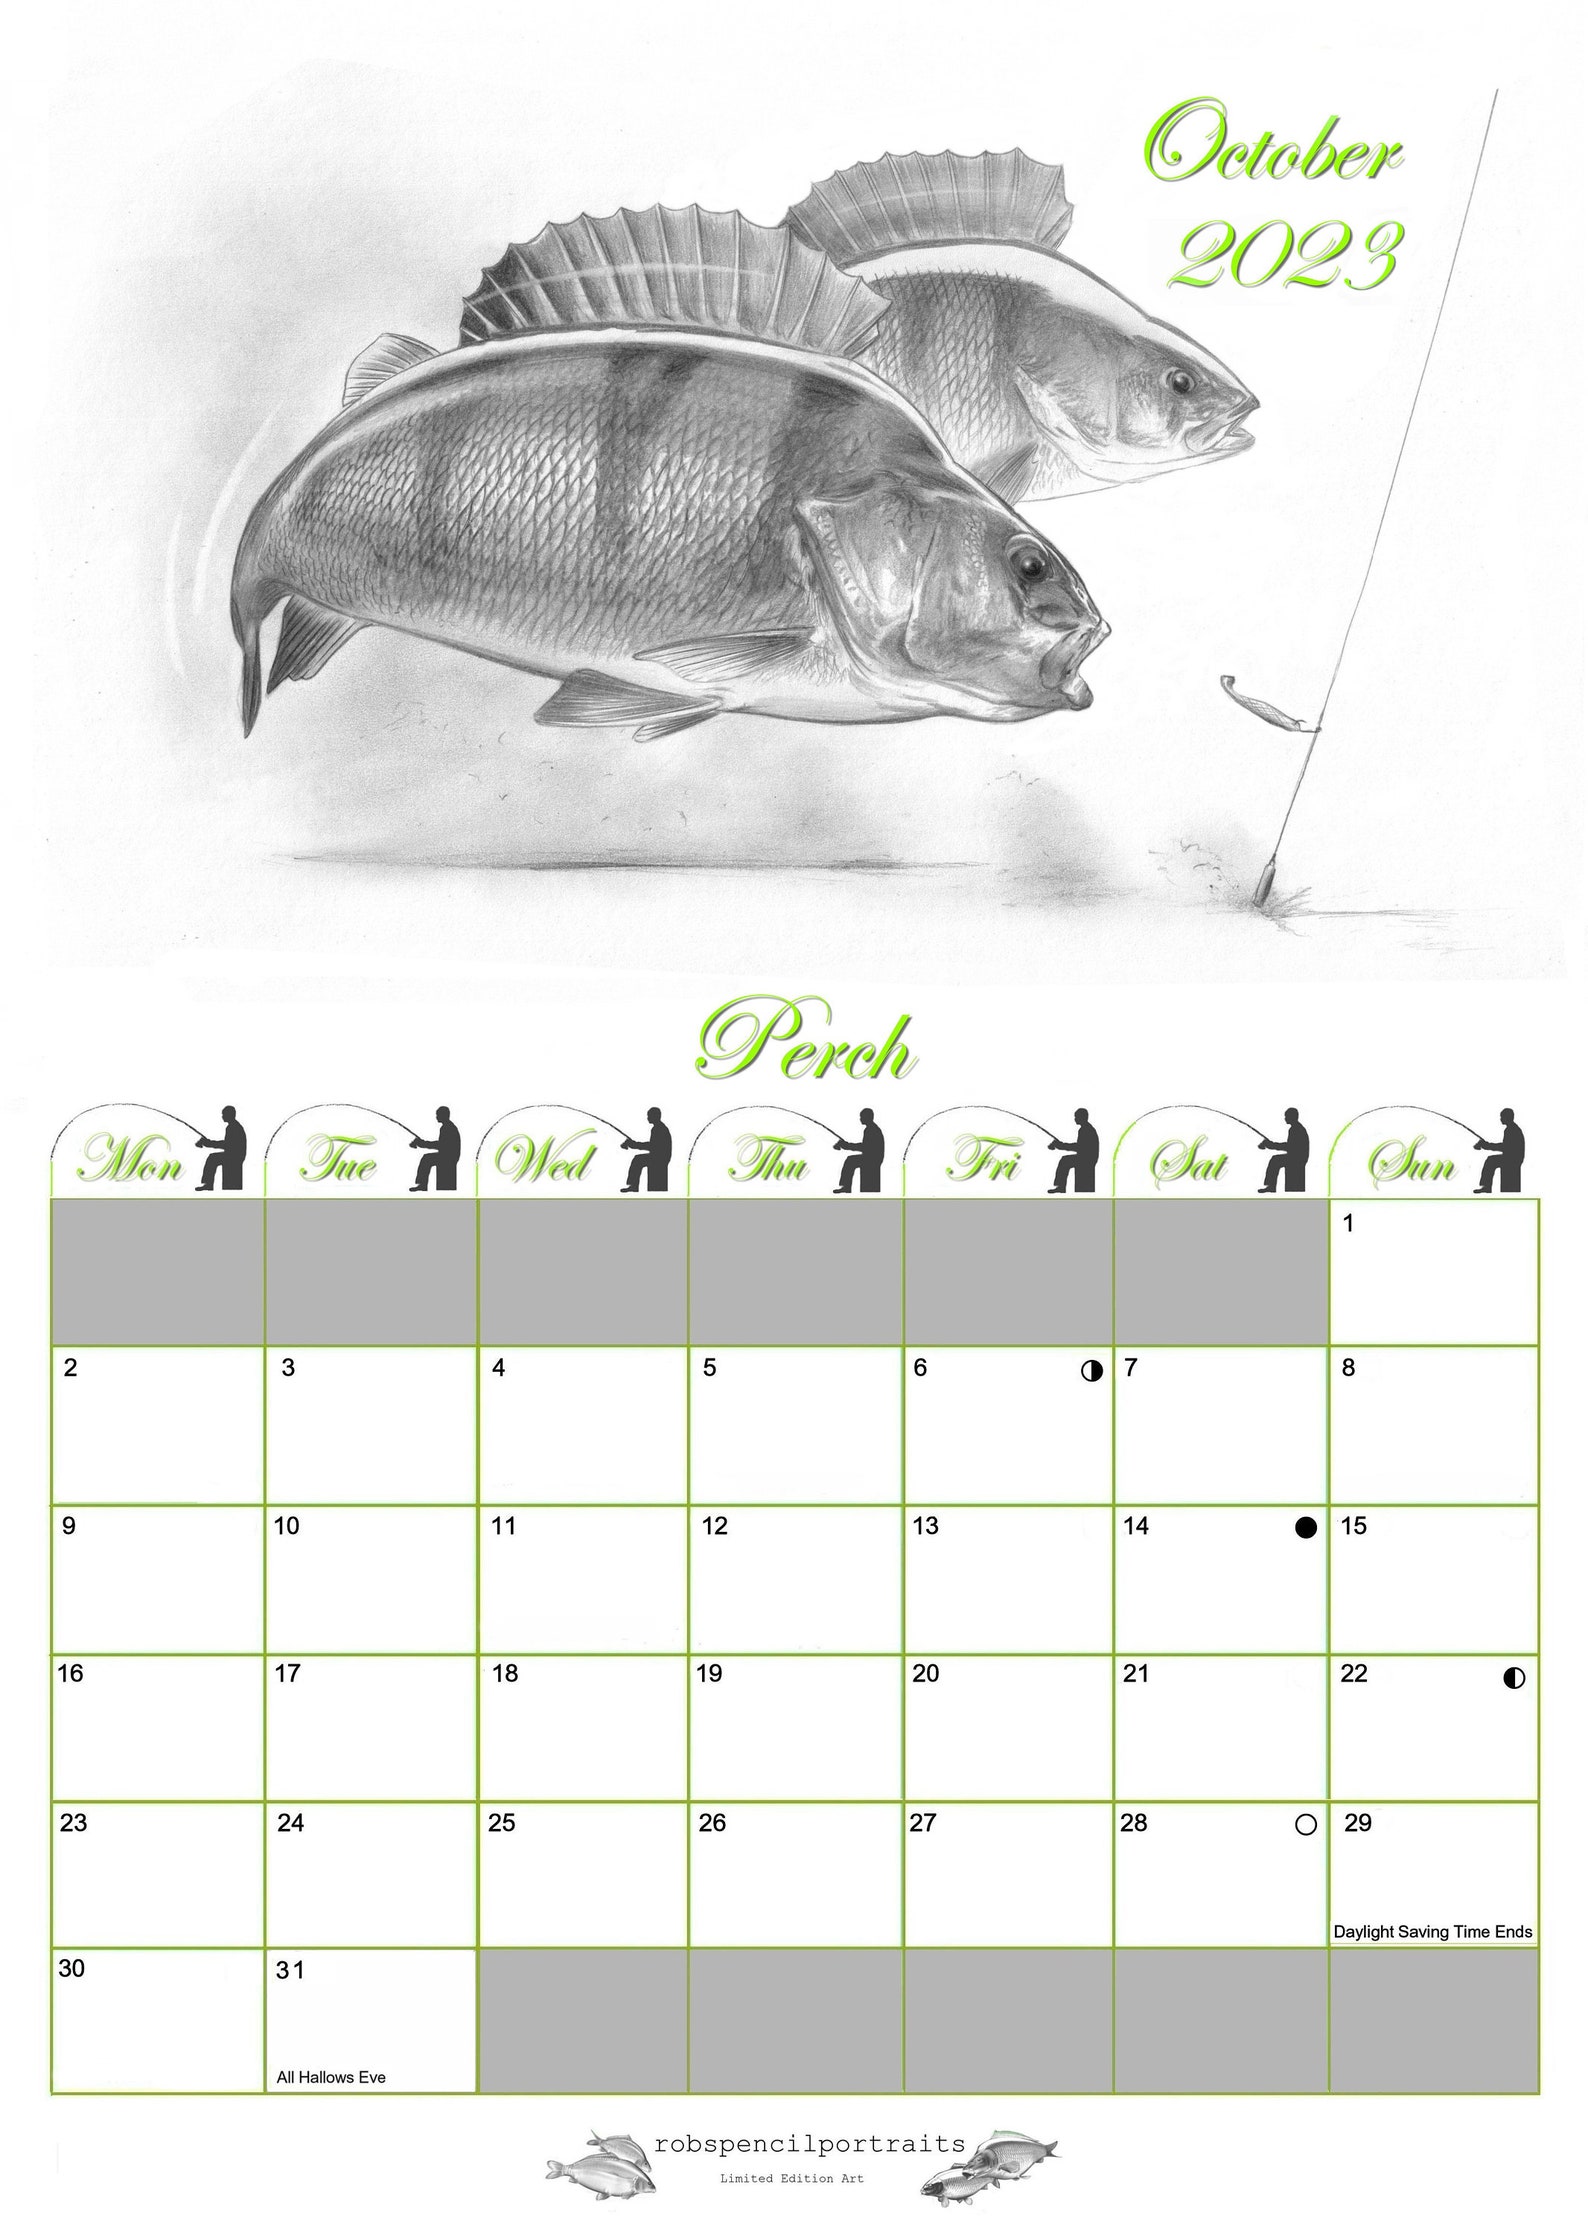 2023 FISHING CALENDAR Featuring Art by Robin Woolnough 2023 Etsy